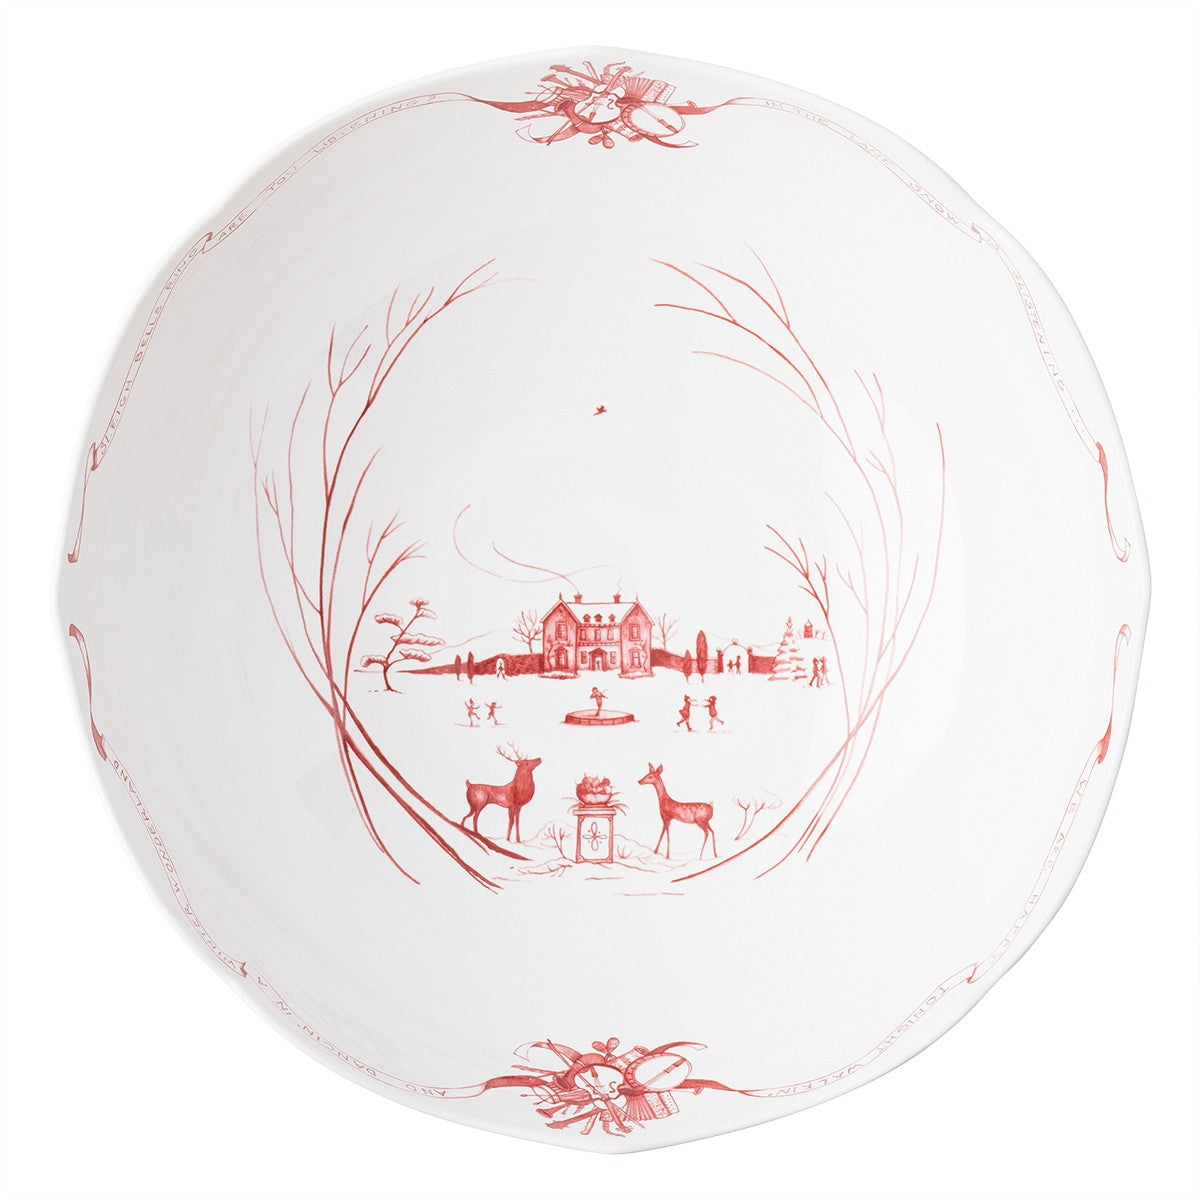 Country Estate Winter Frolic Ruby 13" Centerpiece Bowl